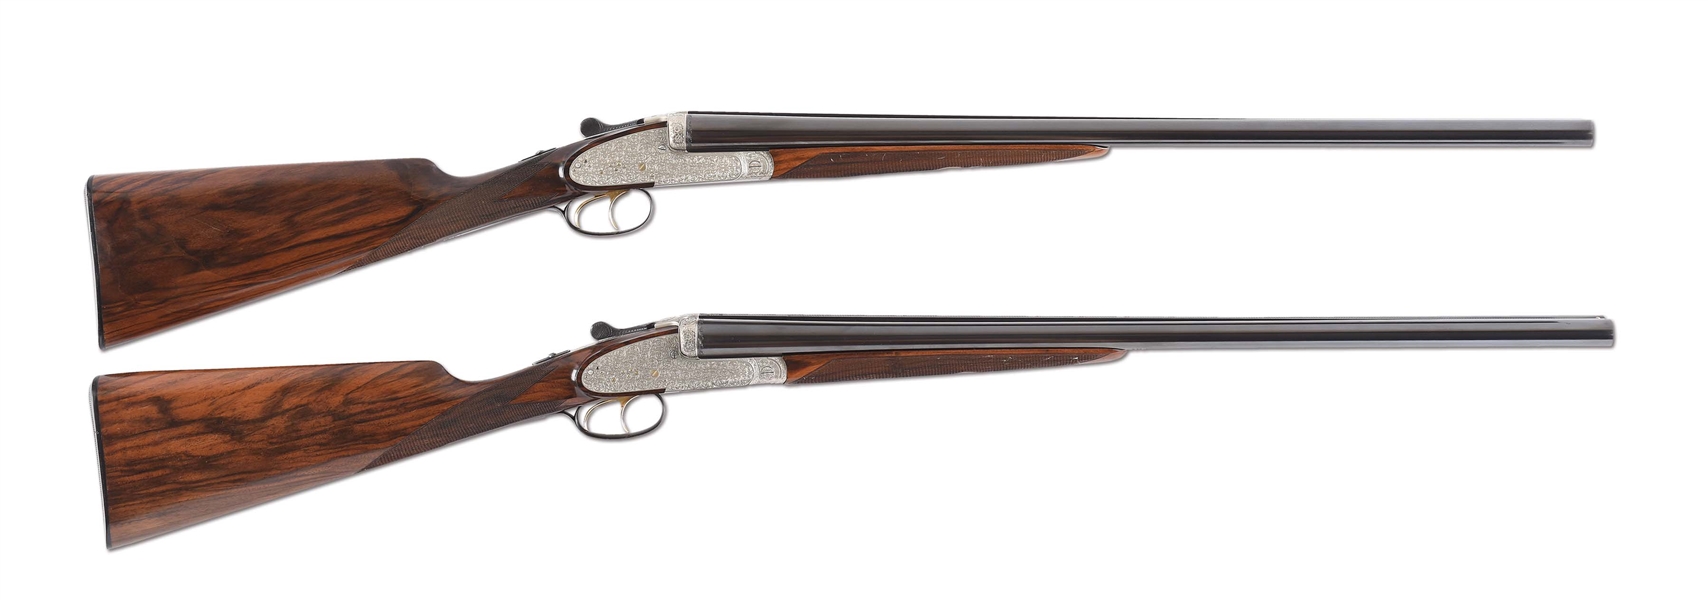 (M) FINELY CRAFTED PAIR OF LUDWIG BOROVNIK BEST SIDELOCK EJECTOR GAME GUNS WITH CASE.